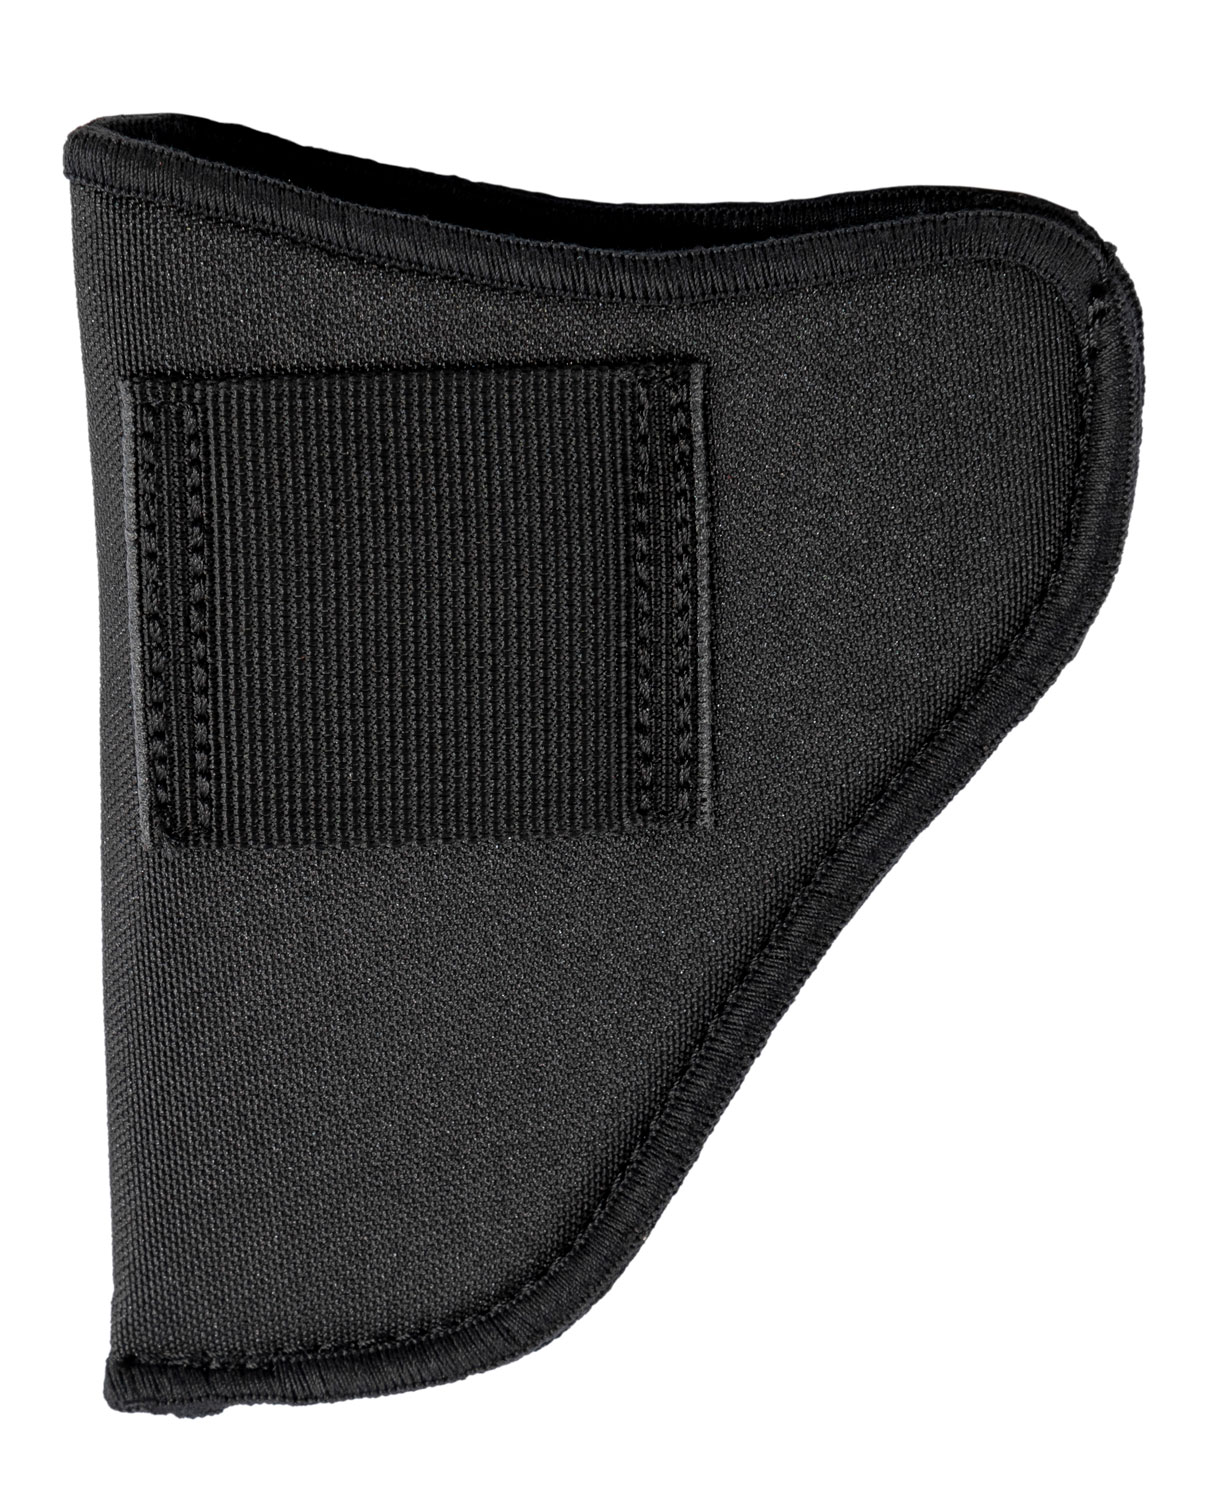 Uncle Mikes 21106 GunMate Hip Holster Size 06 made of Tri-Laminate with Black Finish & Belt Loop Mount Type fits Up to 4